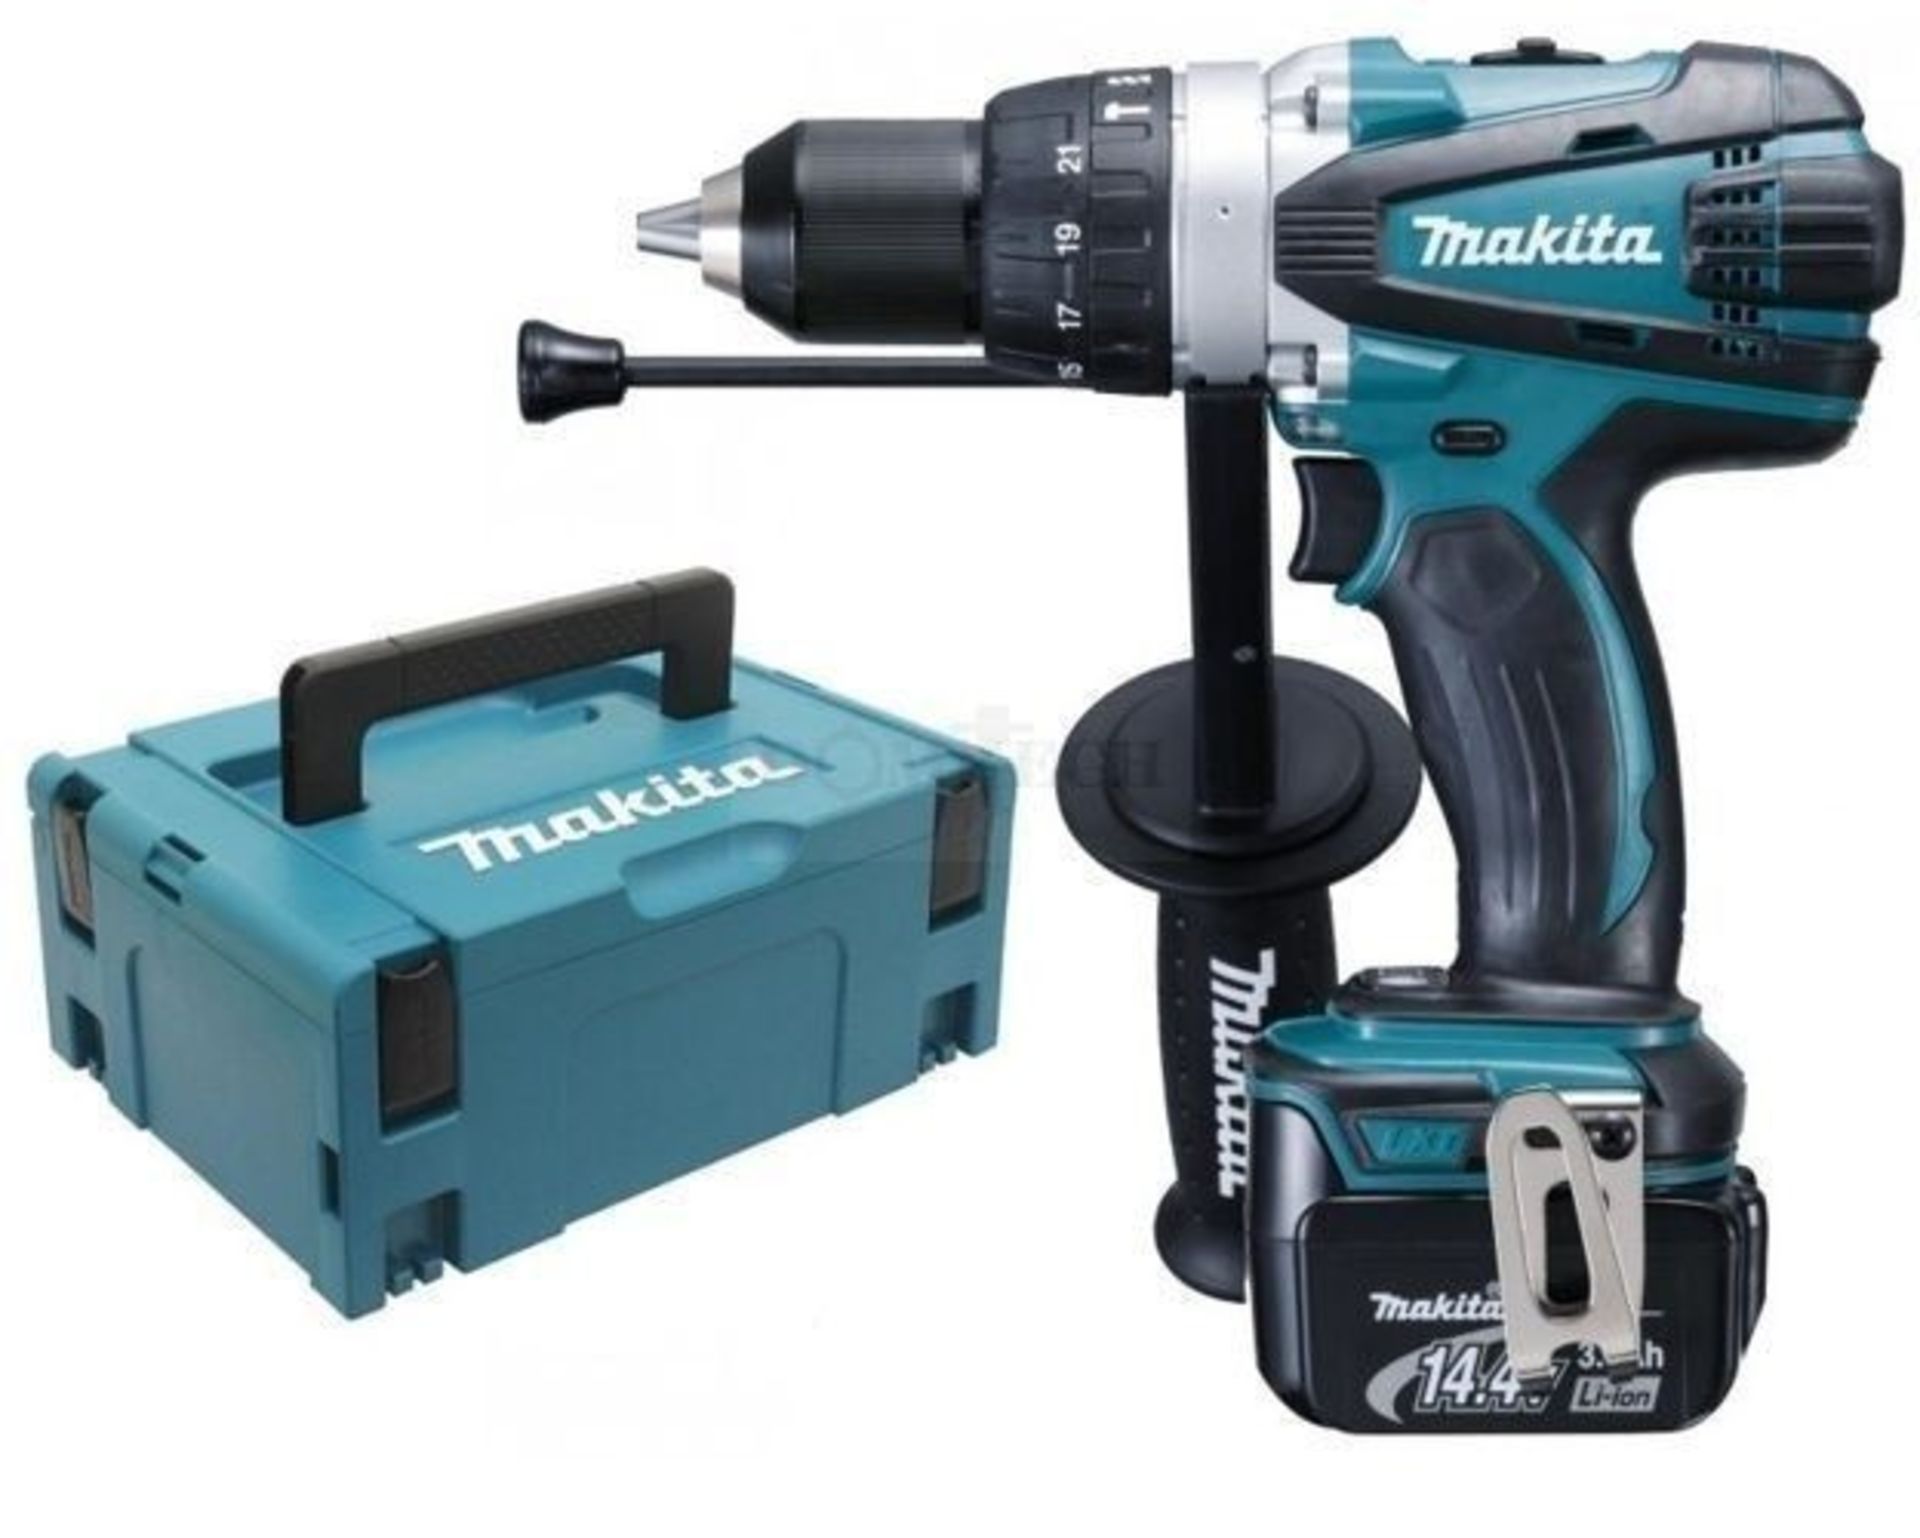 V Brand New Makita 14.4v Hammer Drill With Lithium Ion Battery And Hard Case - Online Price £304.